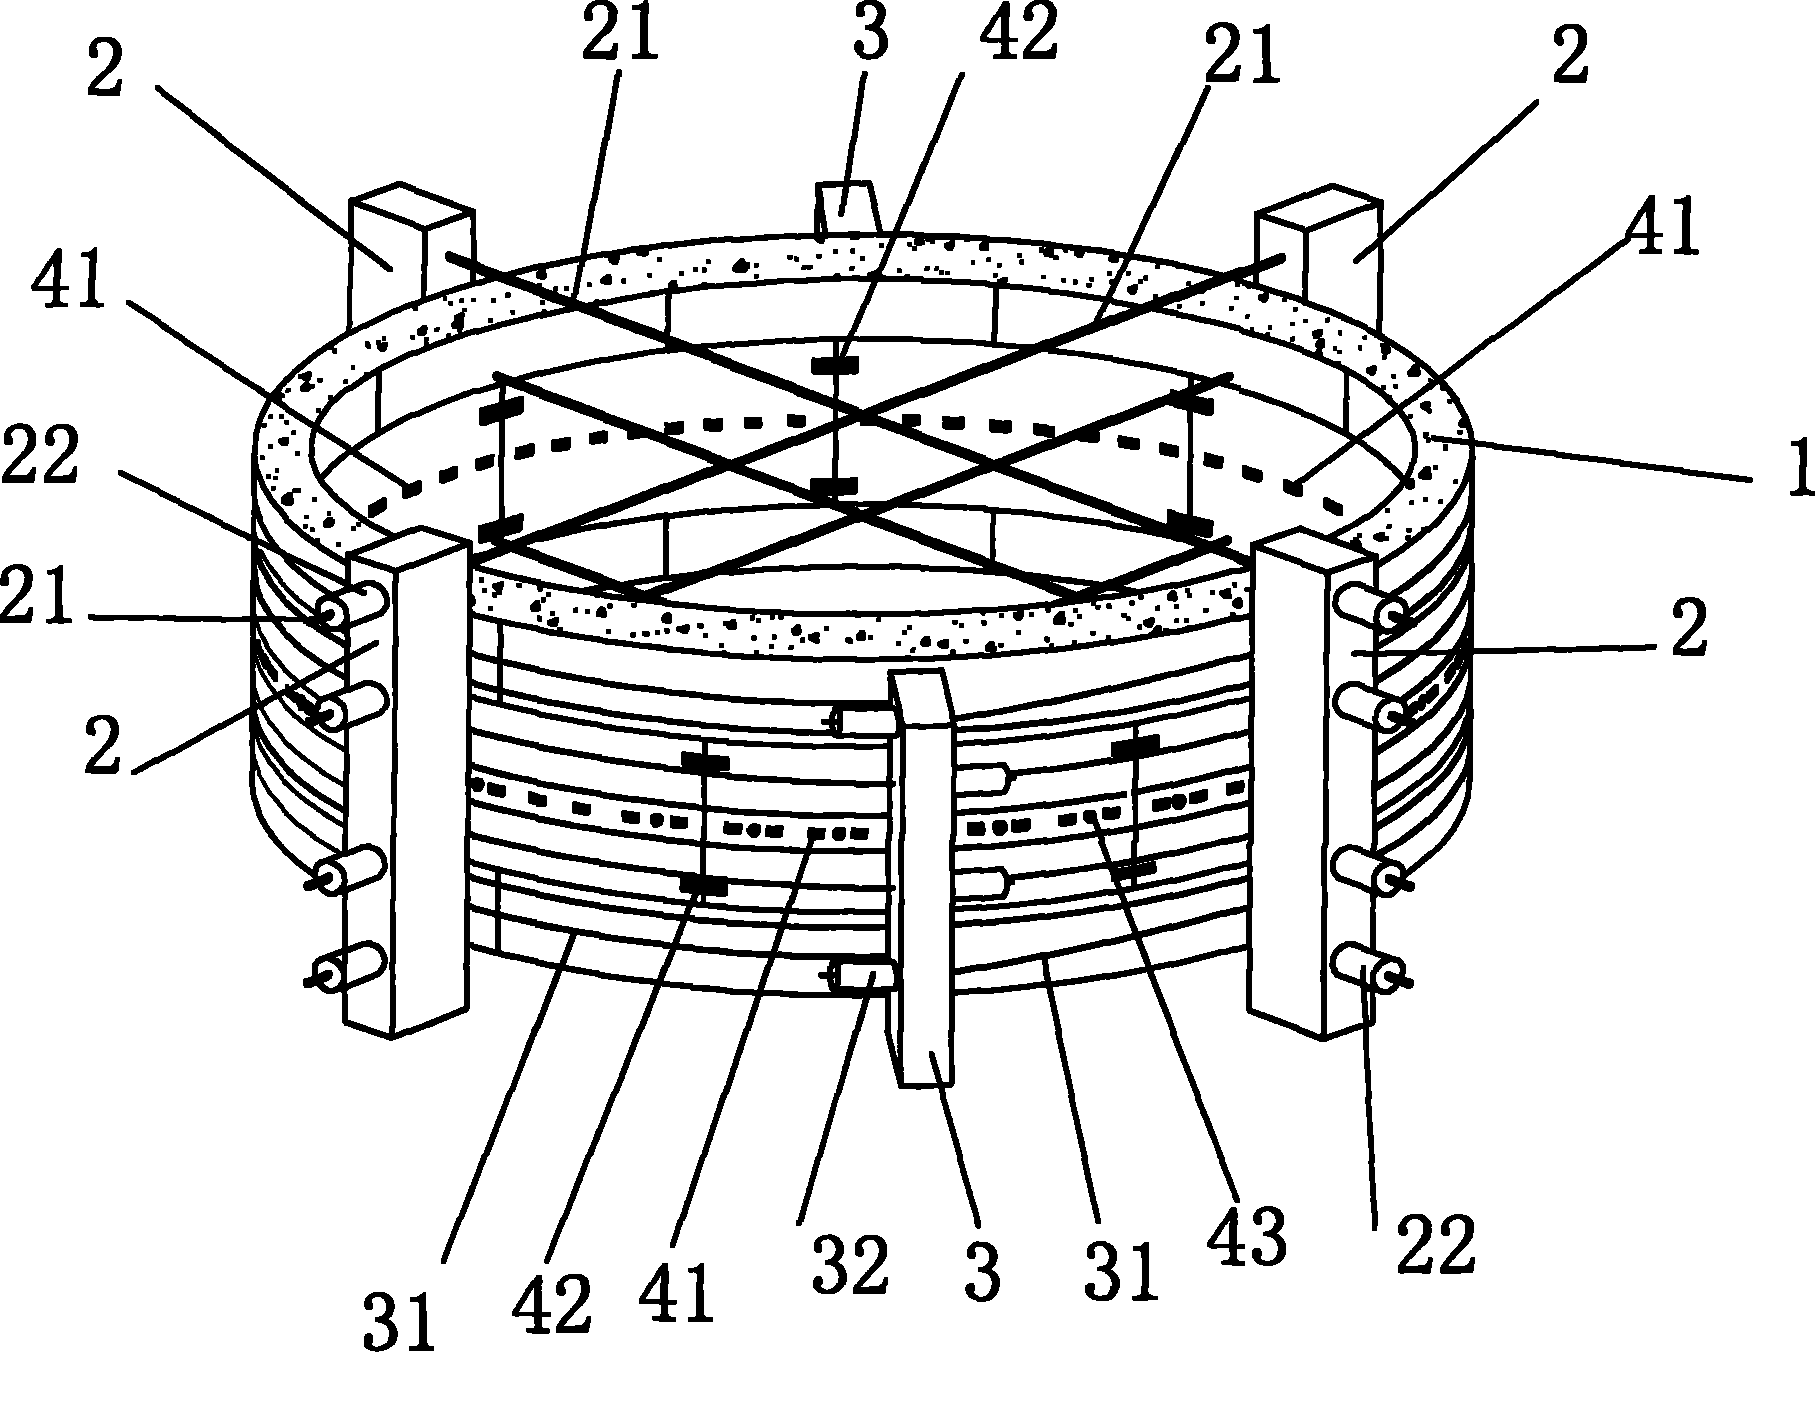 Hydraulic pressure and soil pressure independently loaded shield tunneling structure prototype experiment apparatus